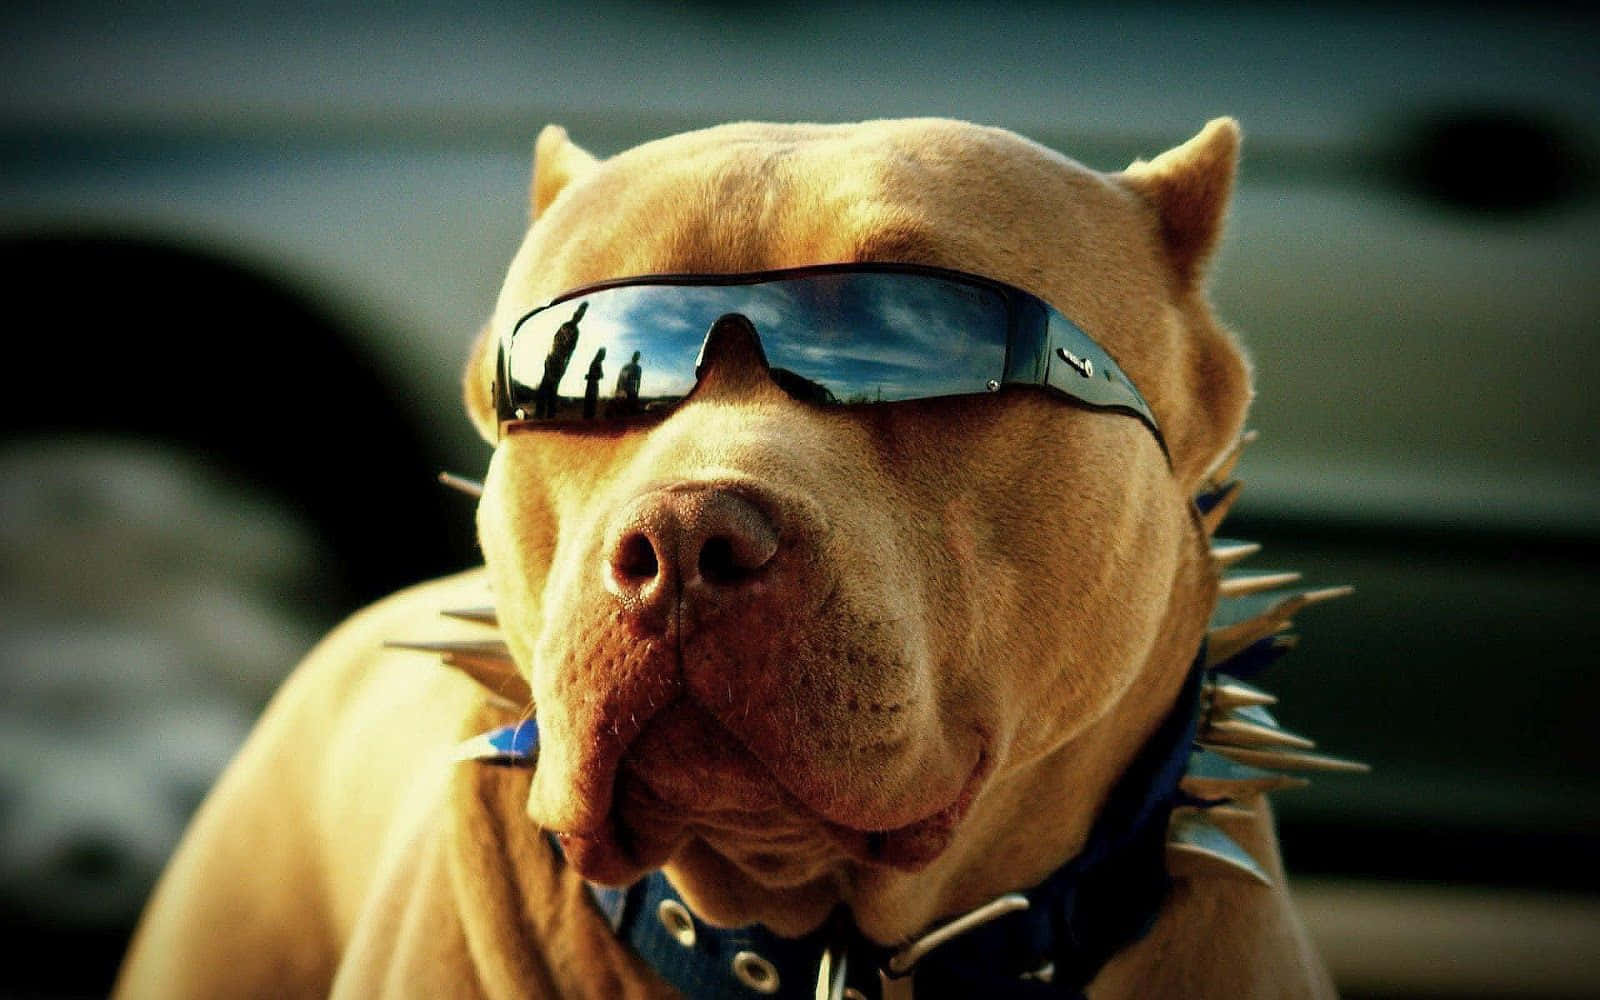 This Pup Is Looking 'cool' With His Shades. Background